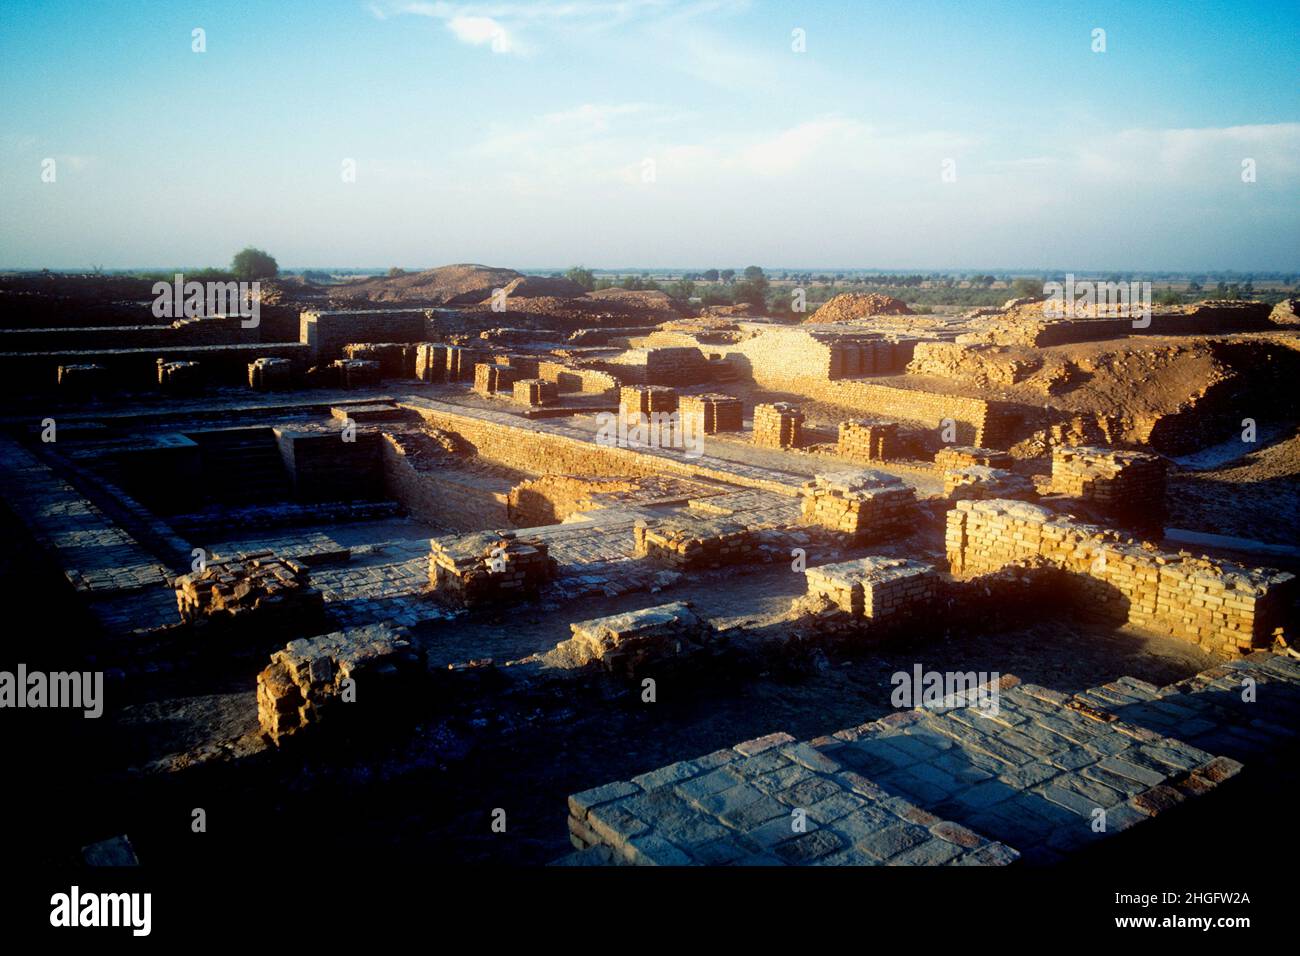 View of the Indus Valley settlement of Mohenjodaro showing the Great Bath: Indus Valley civilisation c.2500BCE, Sindh province of Pakistan Stock Photo